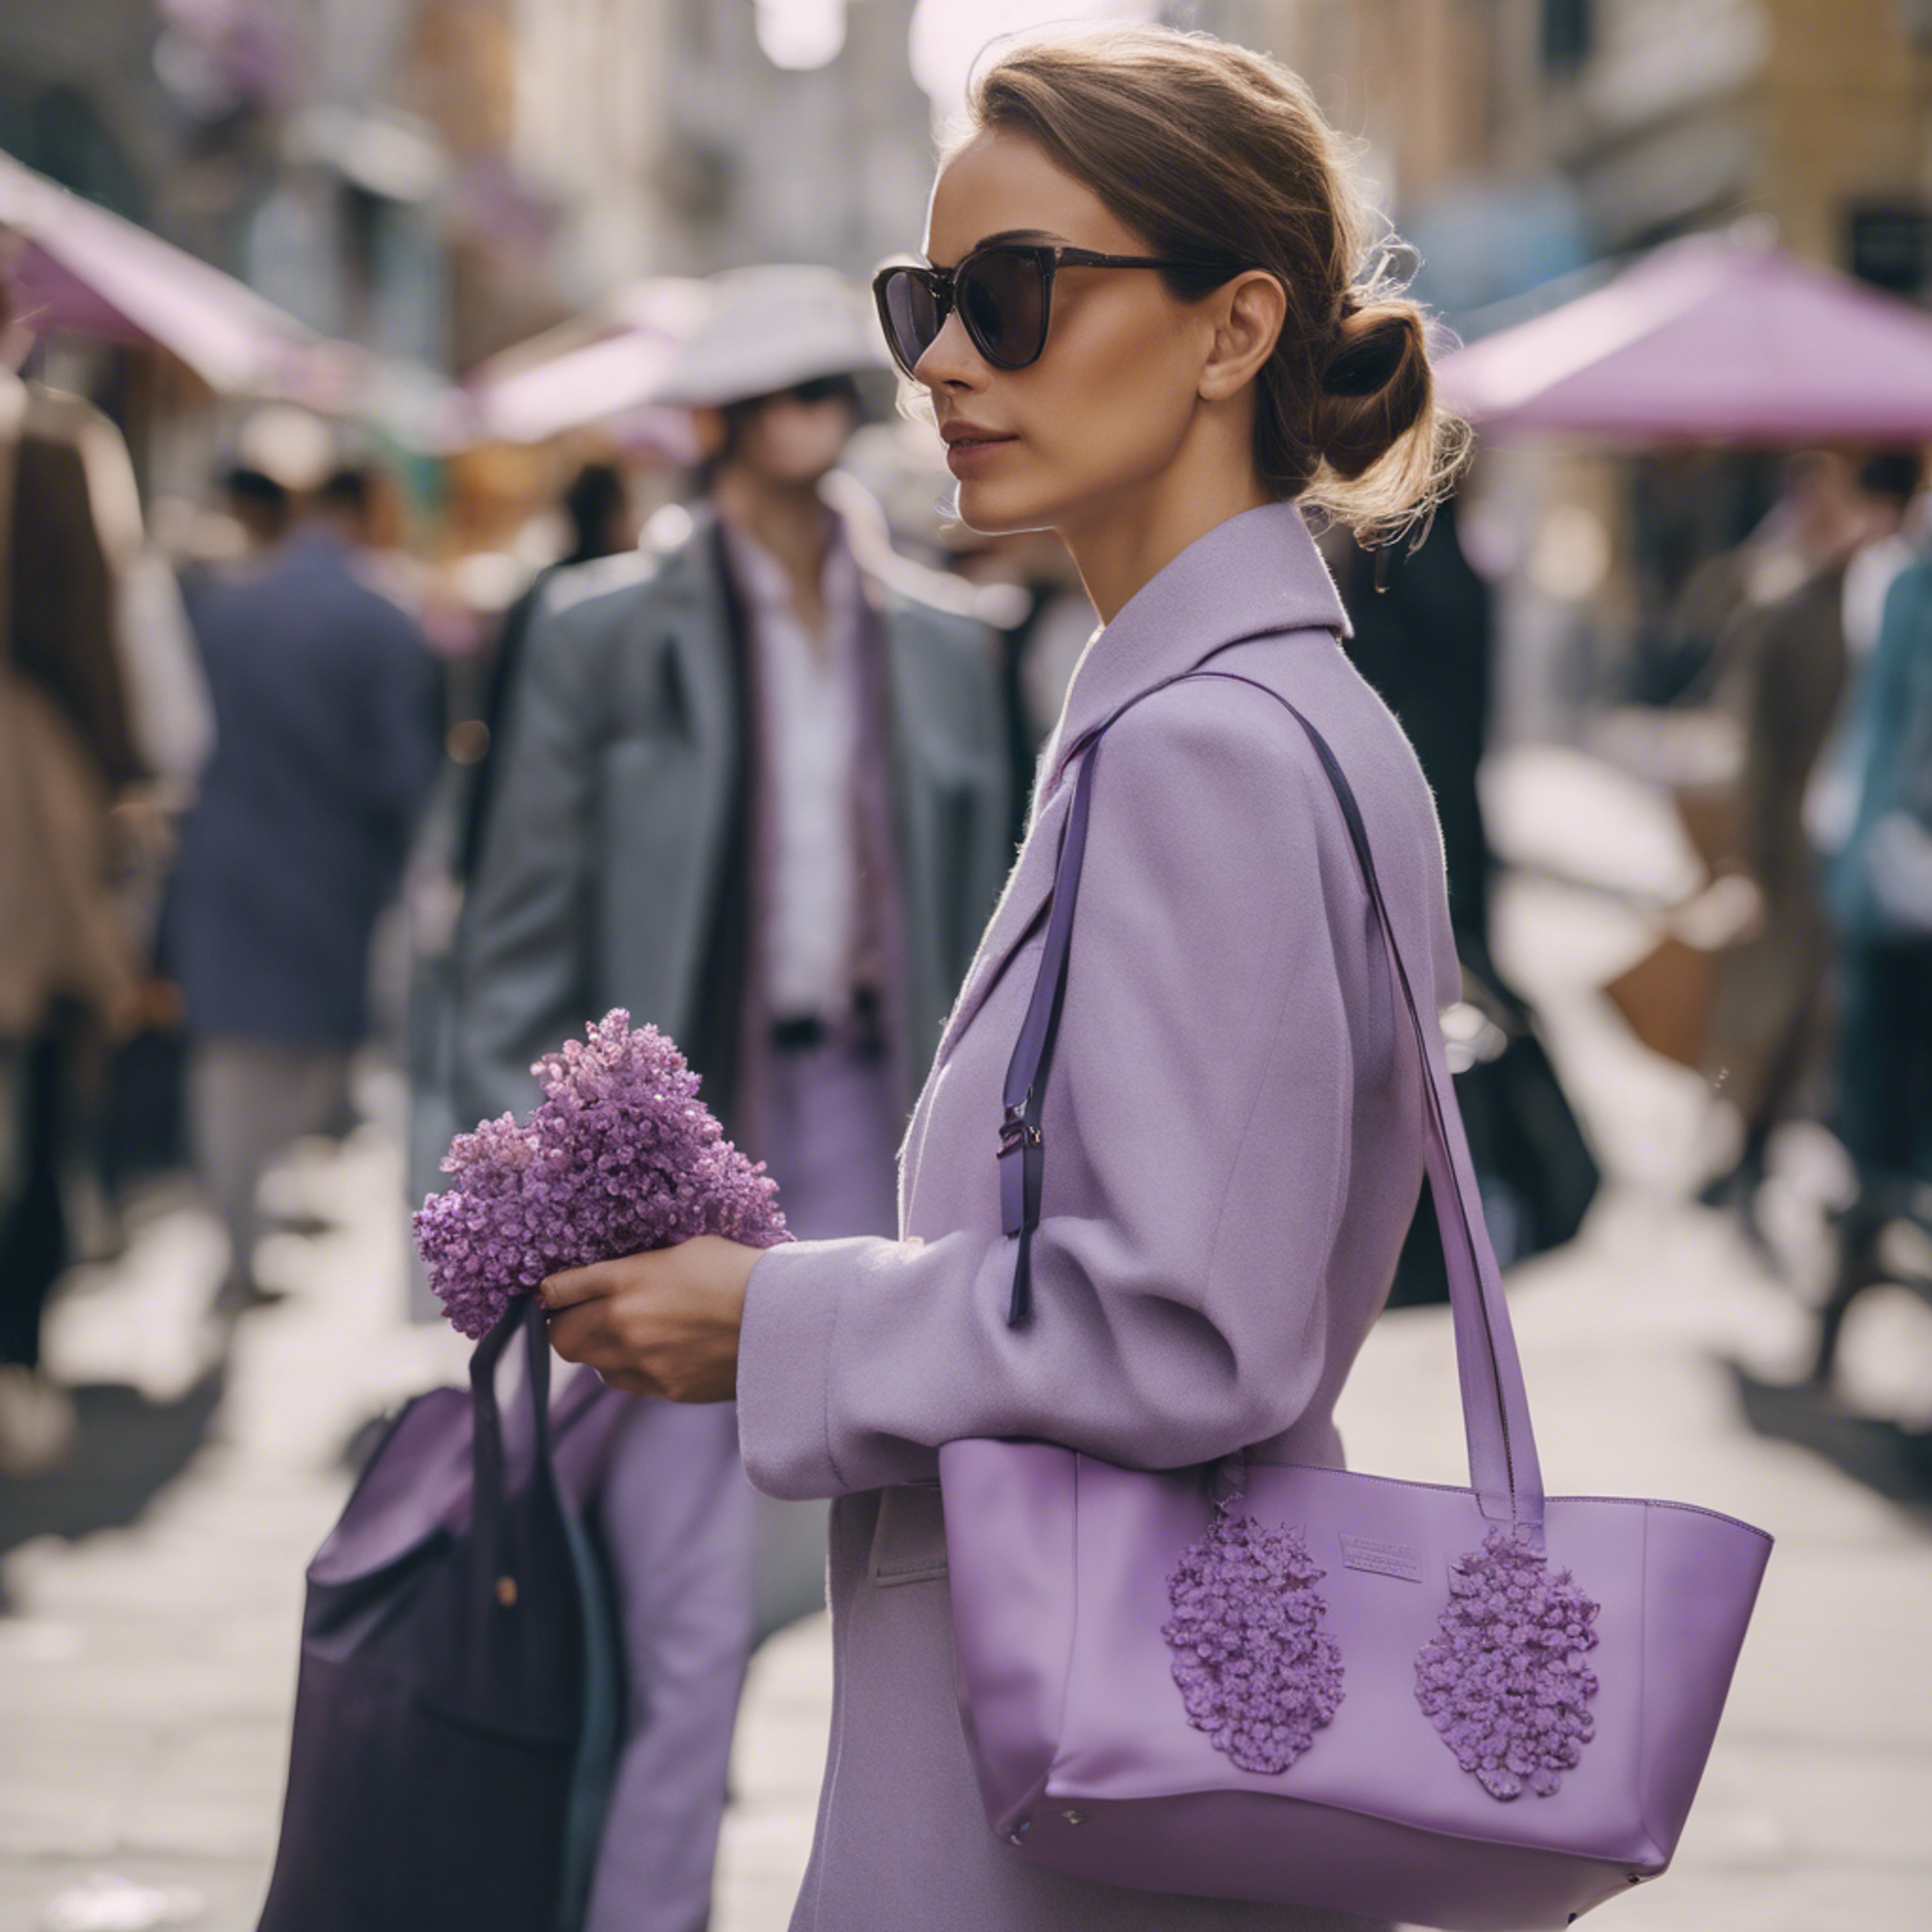 An elegant lady carrying a preppy lilac tote bag while walking along a crowded city street. Обои[fda66da185c34bc685d3]